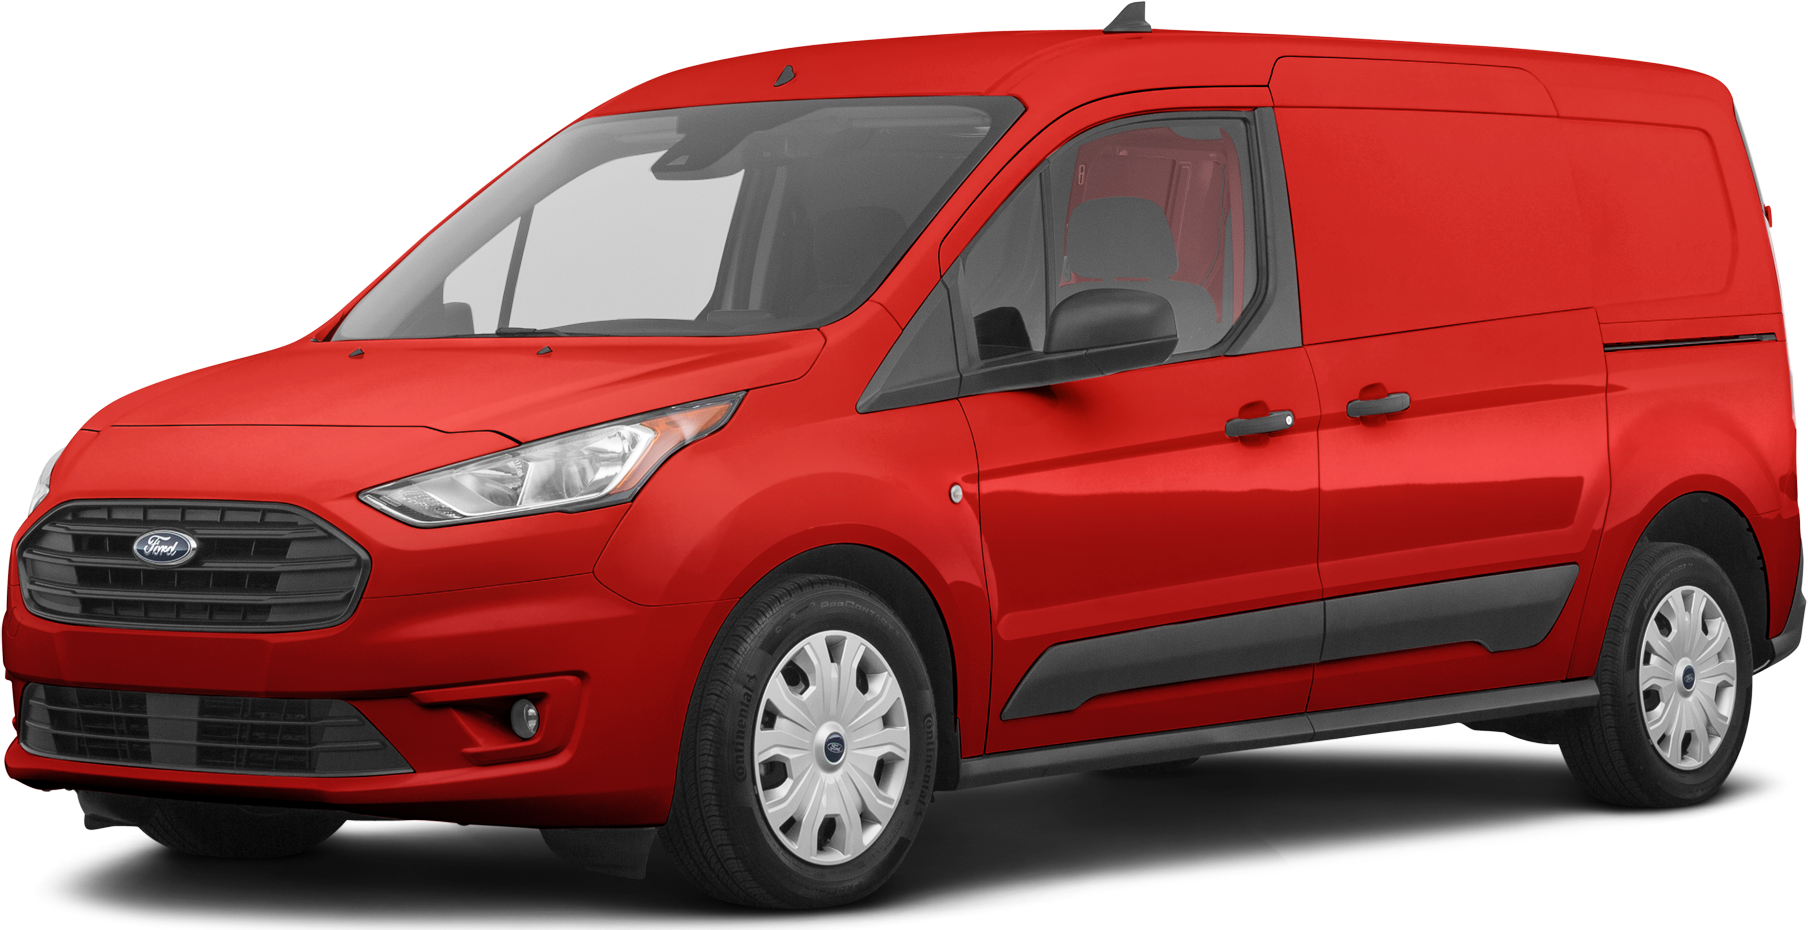 2021 Ford Transit Connect Cargo Van Price, Value, Ratings & Reviews